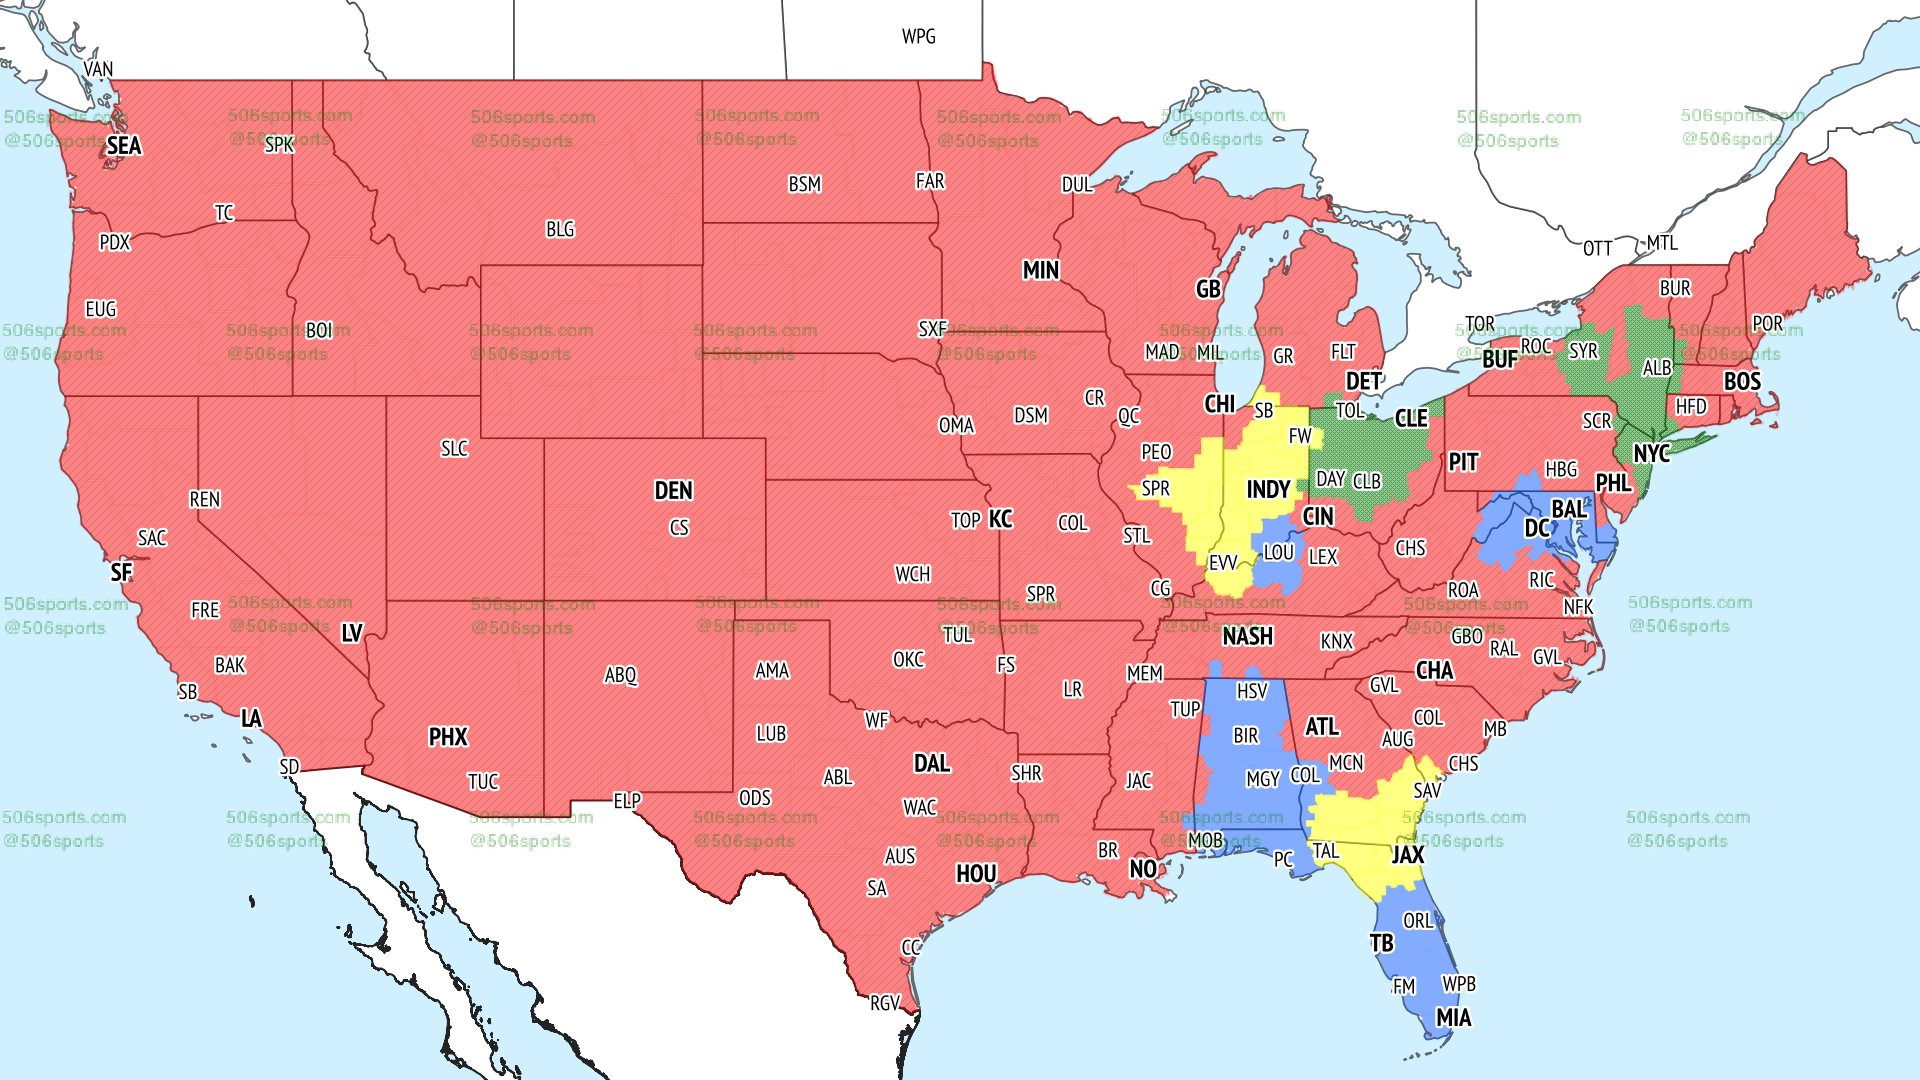 NFL coverage map of early CBS games in Week 2